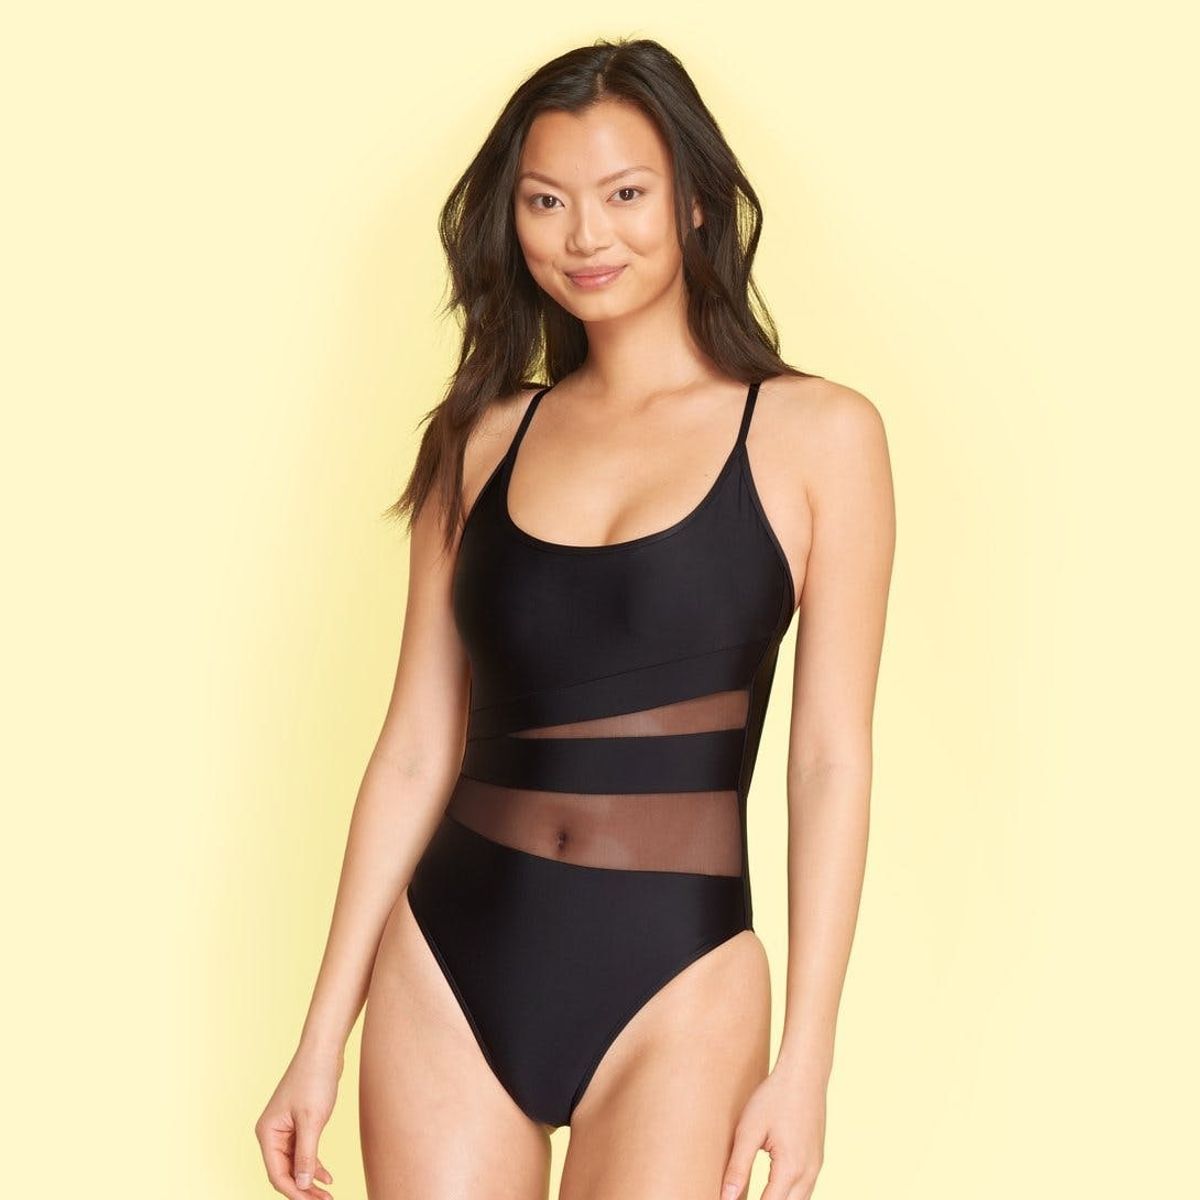 Not-So-Basic Little Black Bathing Suits You Need for Summer